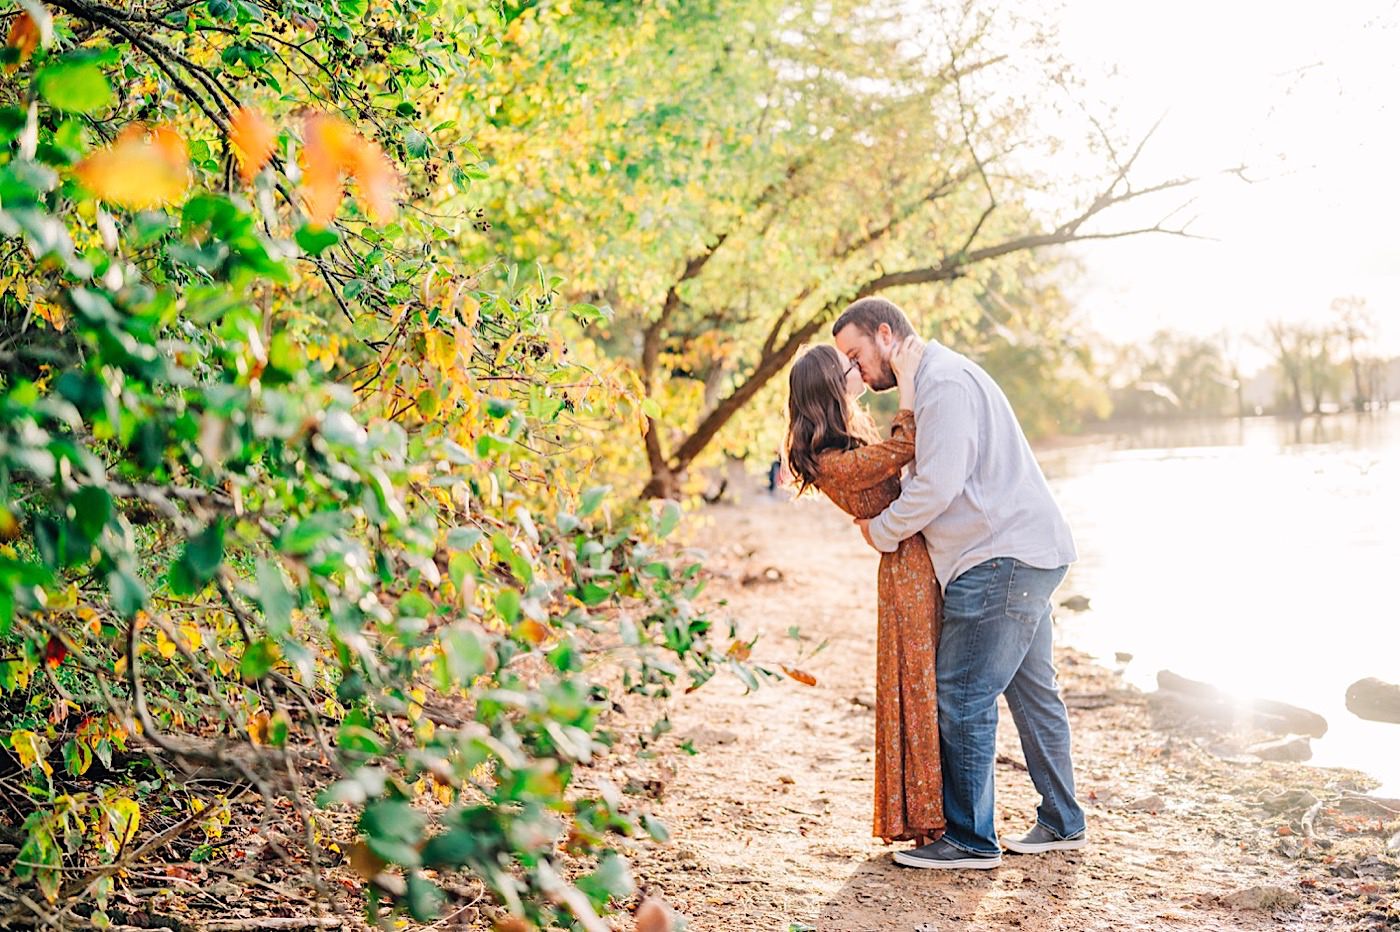 Southern Maryland Wedding Photographer, fall colors in Maryland, Kyra Gustwick, Loch Raven Reservoir Engagement Session, Baltimore MD Photographer